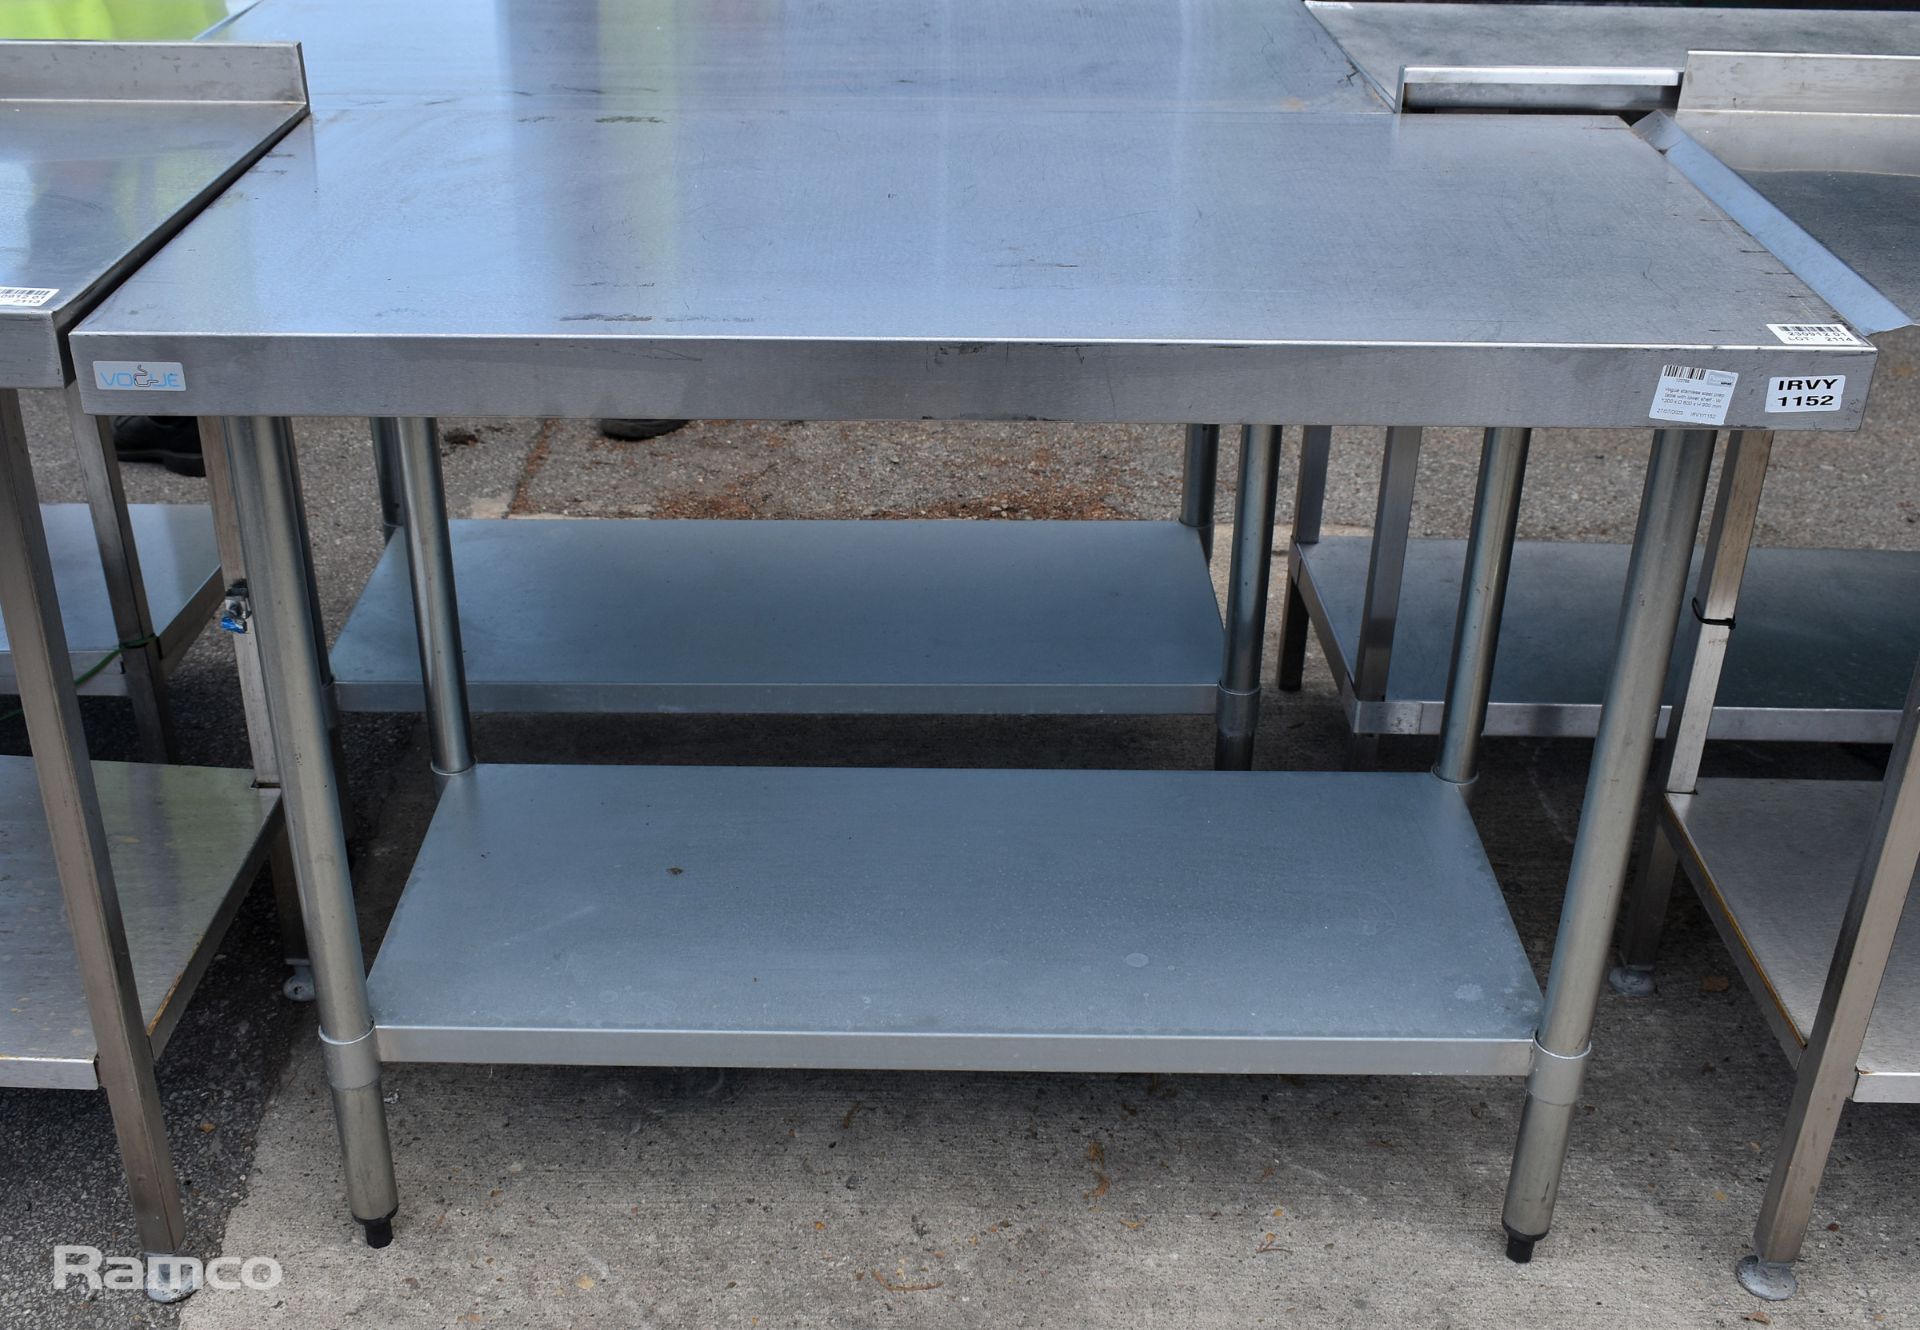 Vogue stainless steel prep table with lower shelf - W 1200 x D 600 x H 900mm